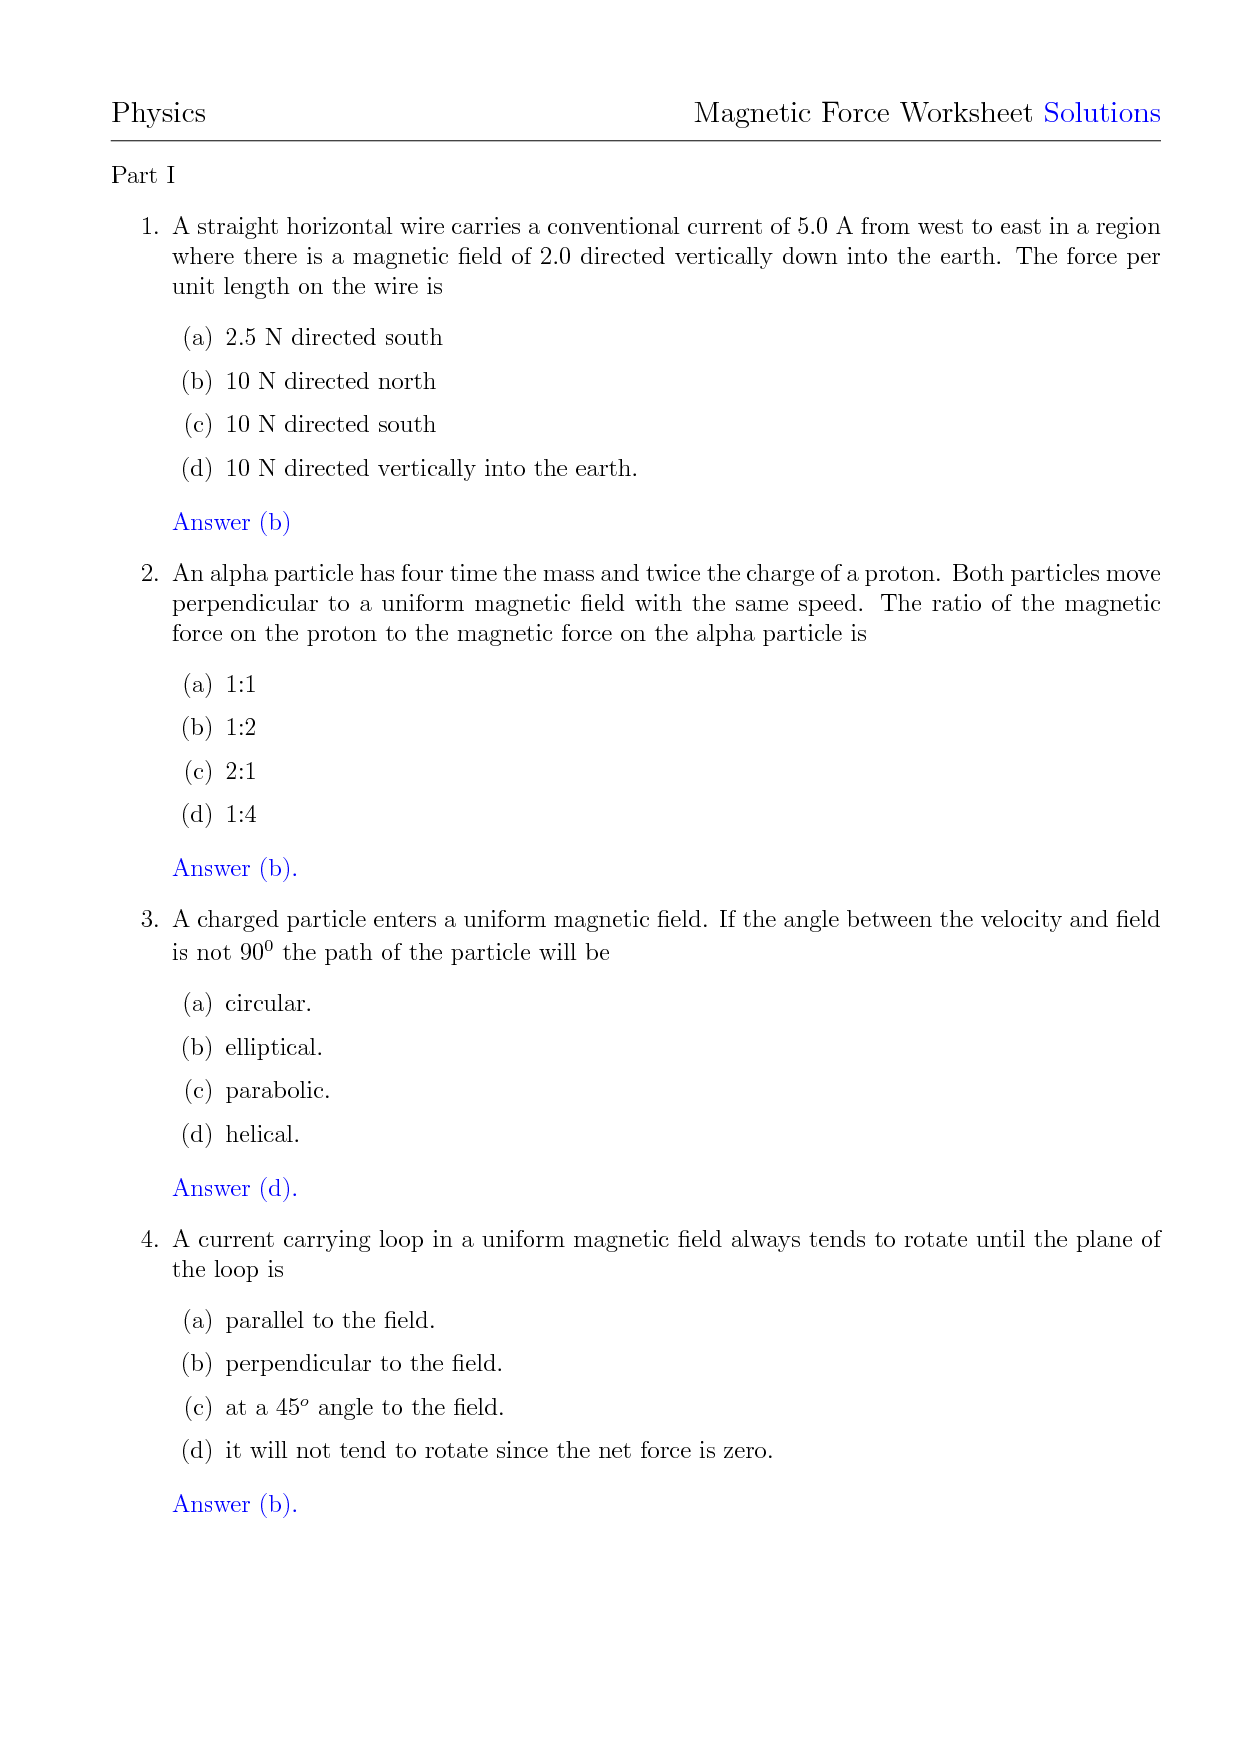 Physics Force Worksheets with Answers Image